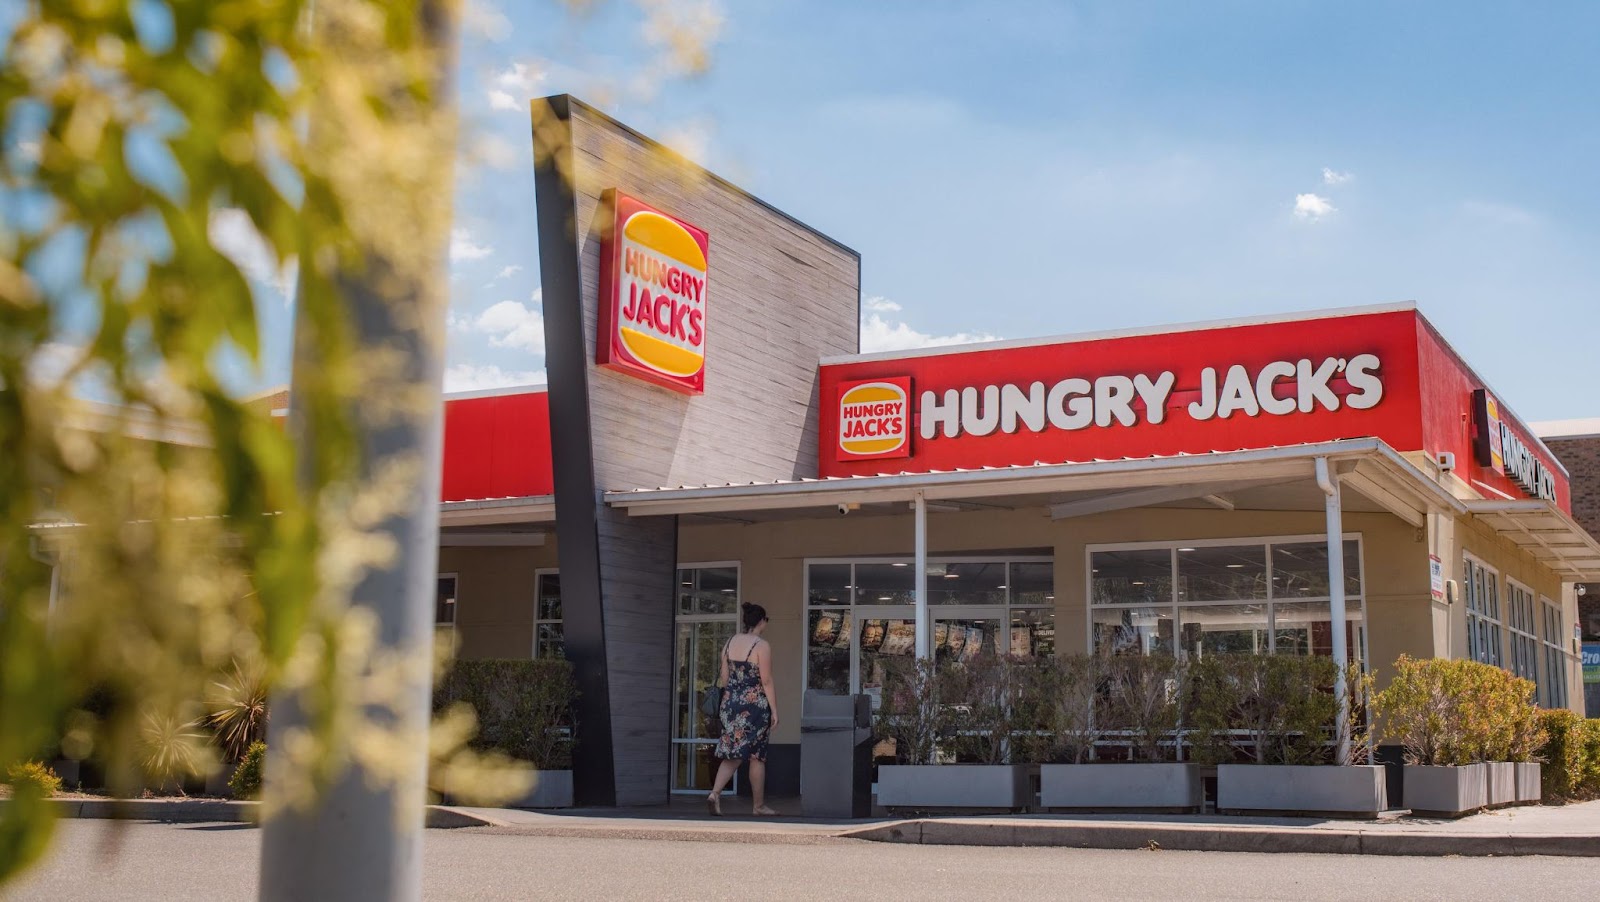 <u>Query</u>: Lady in a sundress going to eat fast food on a sunny day<br>
      <u>Named Entity</u>: Hungry Jacks